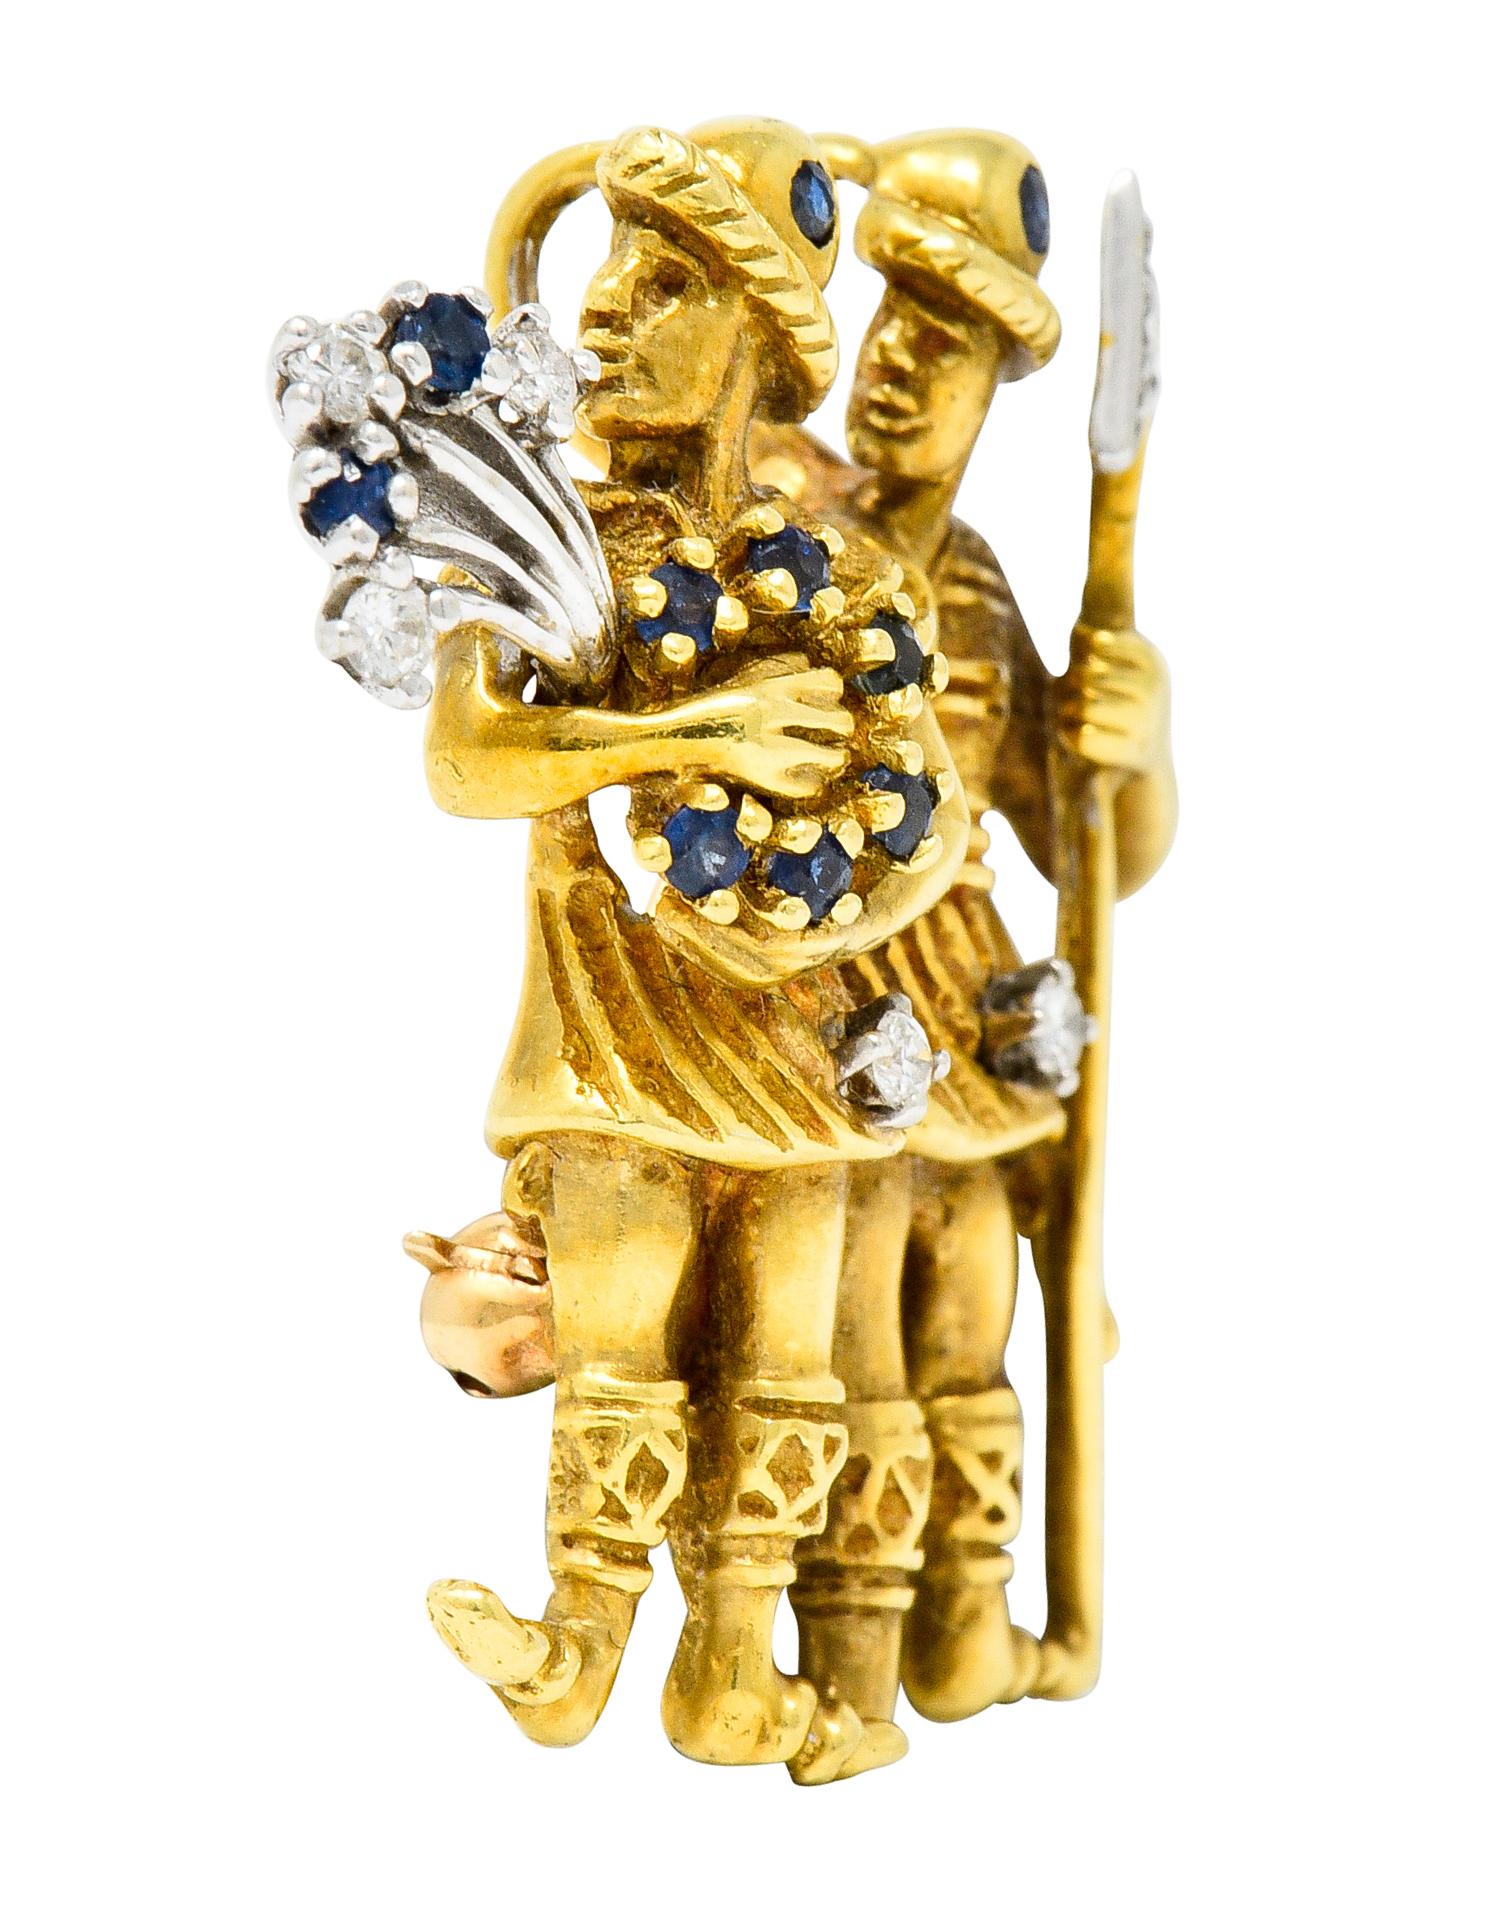 Brooch is designed as the two Roman twins Castor and Pollux, representative of the Gemini Zodiac sign

Highly rendered as male figures adorned in Roman garb with one twin grasping a spear while the other twin holds a wreath of victory and